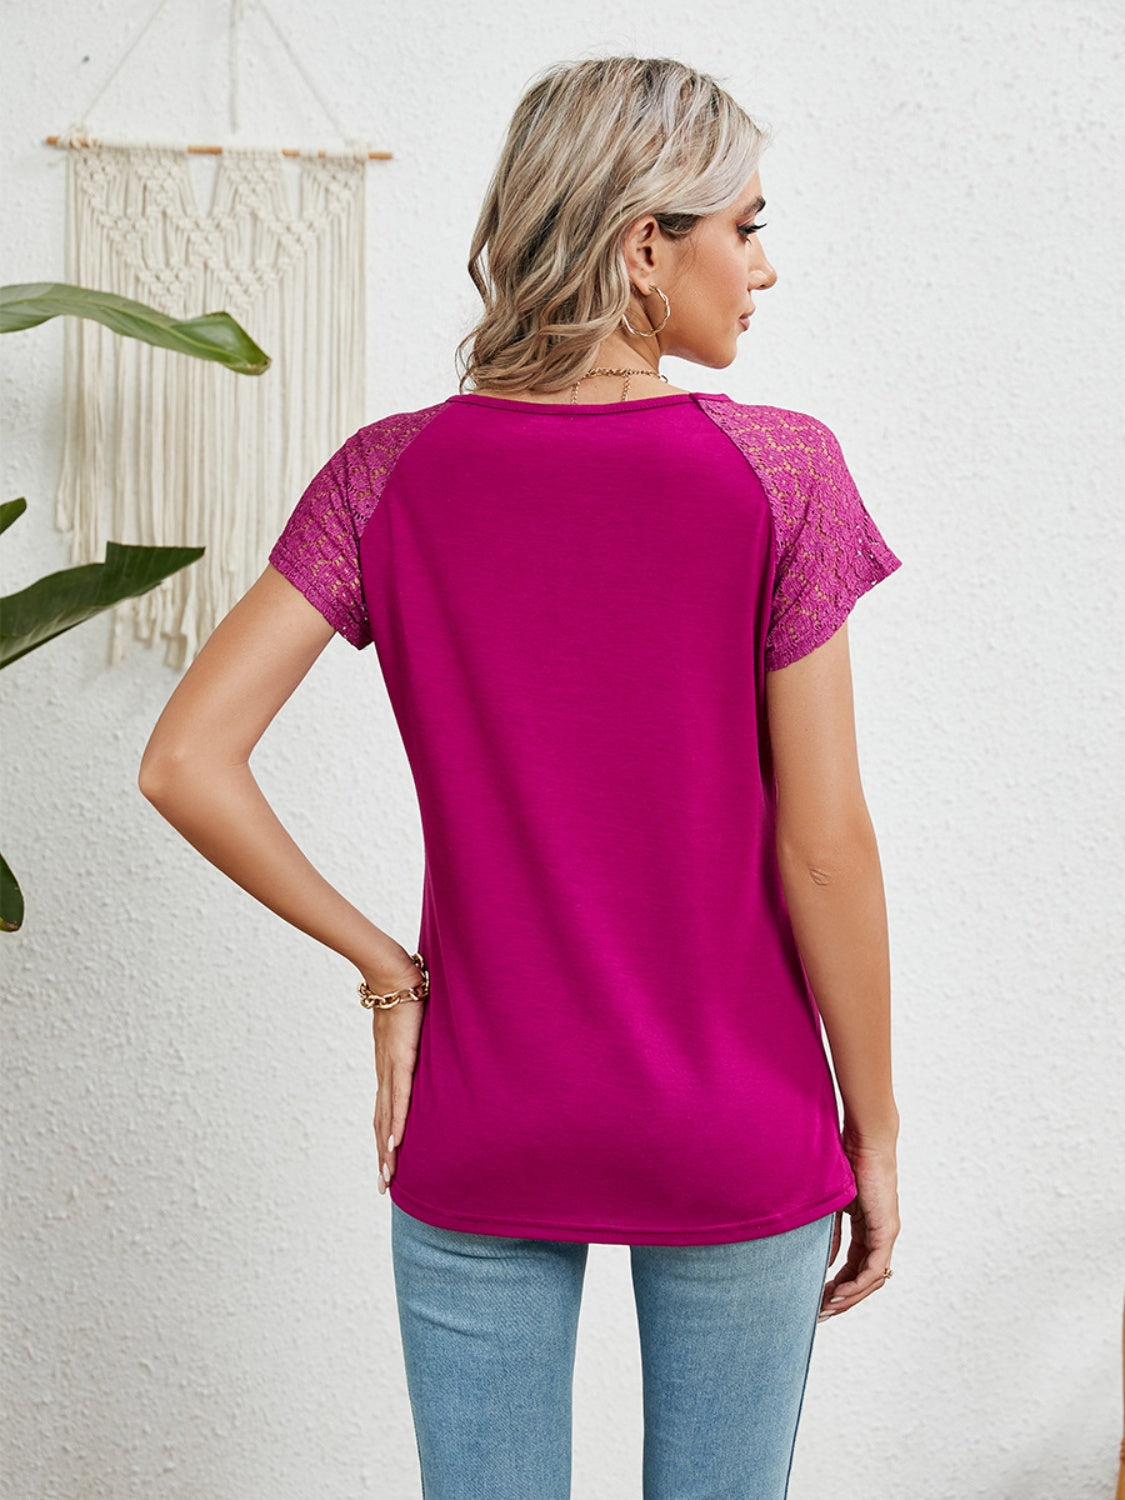 Elevate your style with our Lace Detail T-Shirt in pink, blue, white, black - perfect blend of comfort and chic for any occasion